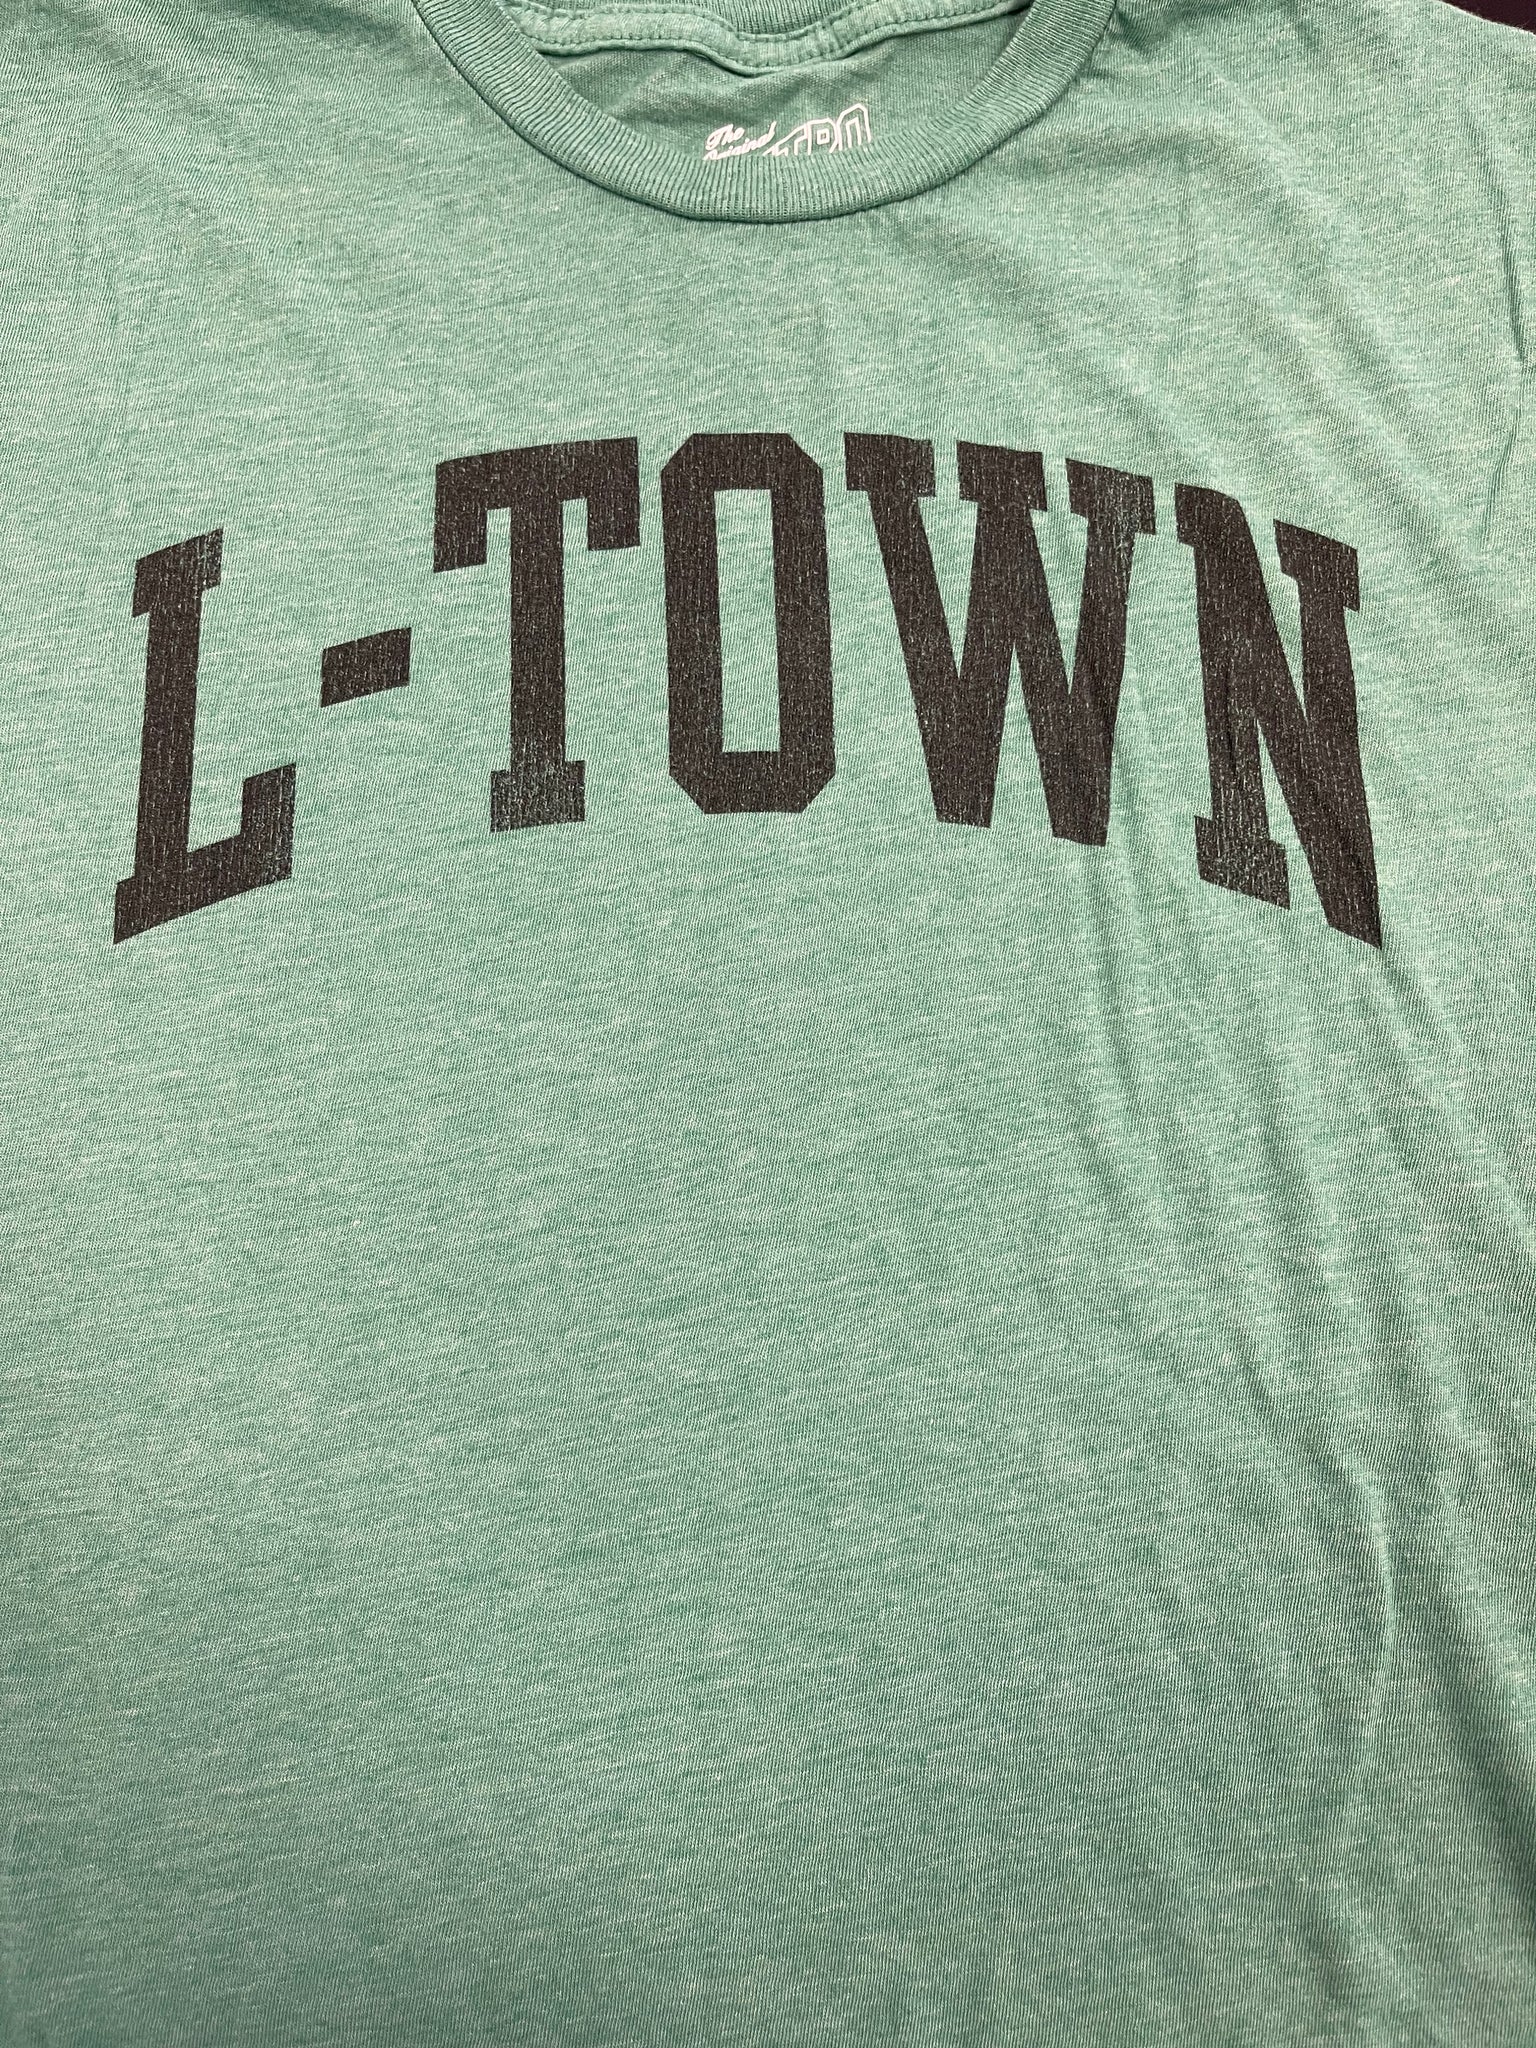 THE EXCLUSIVE LTOWN T - GREEN